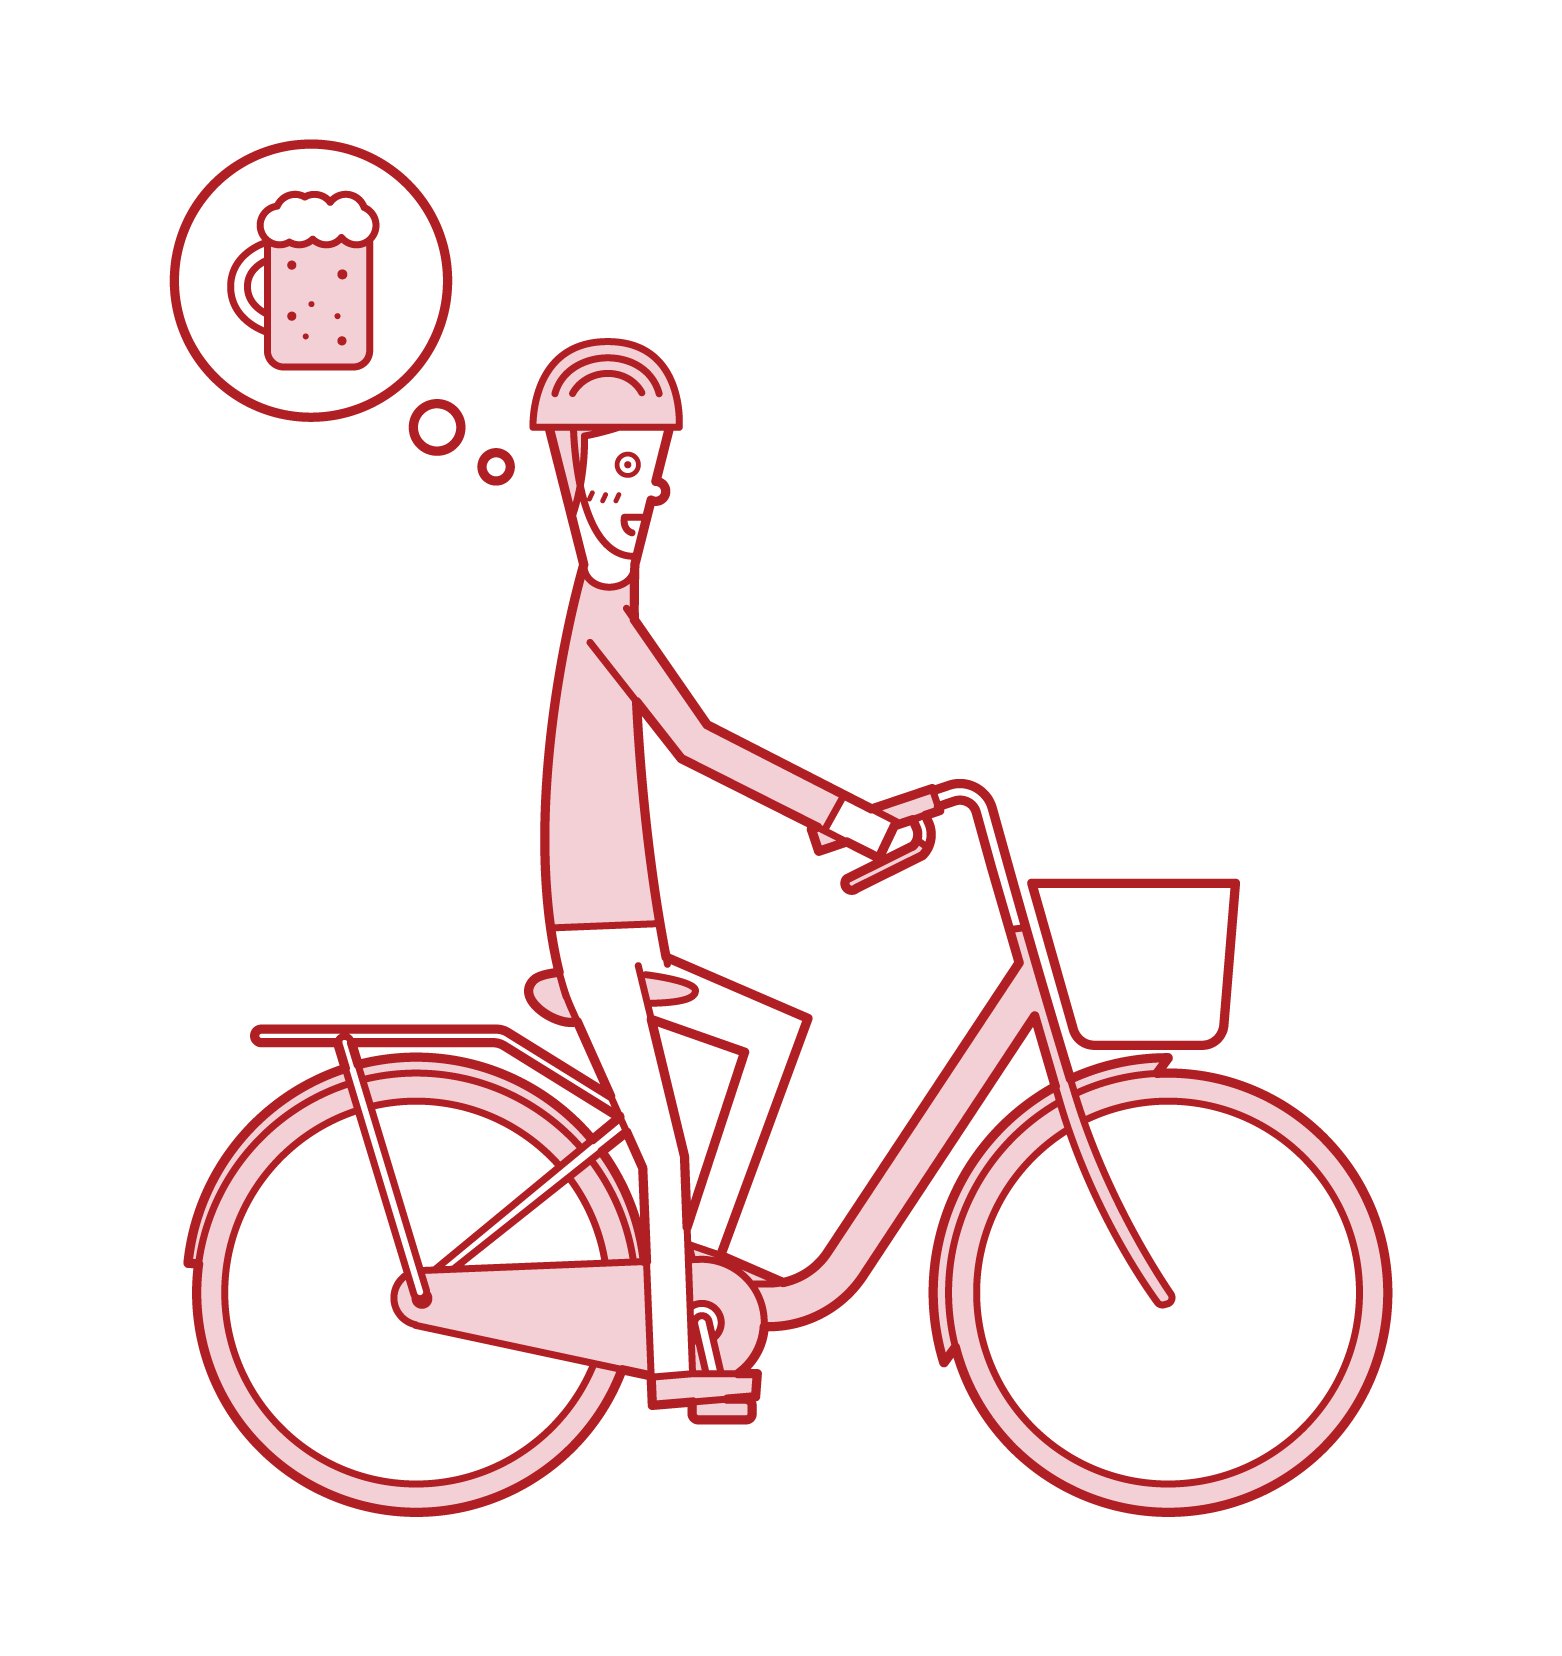 Illustration of a man who drinks and drinks on a bicycle